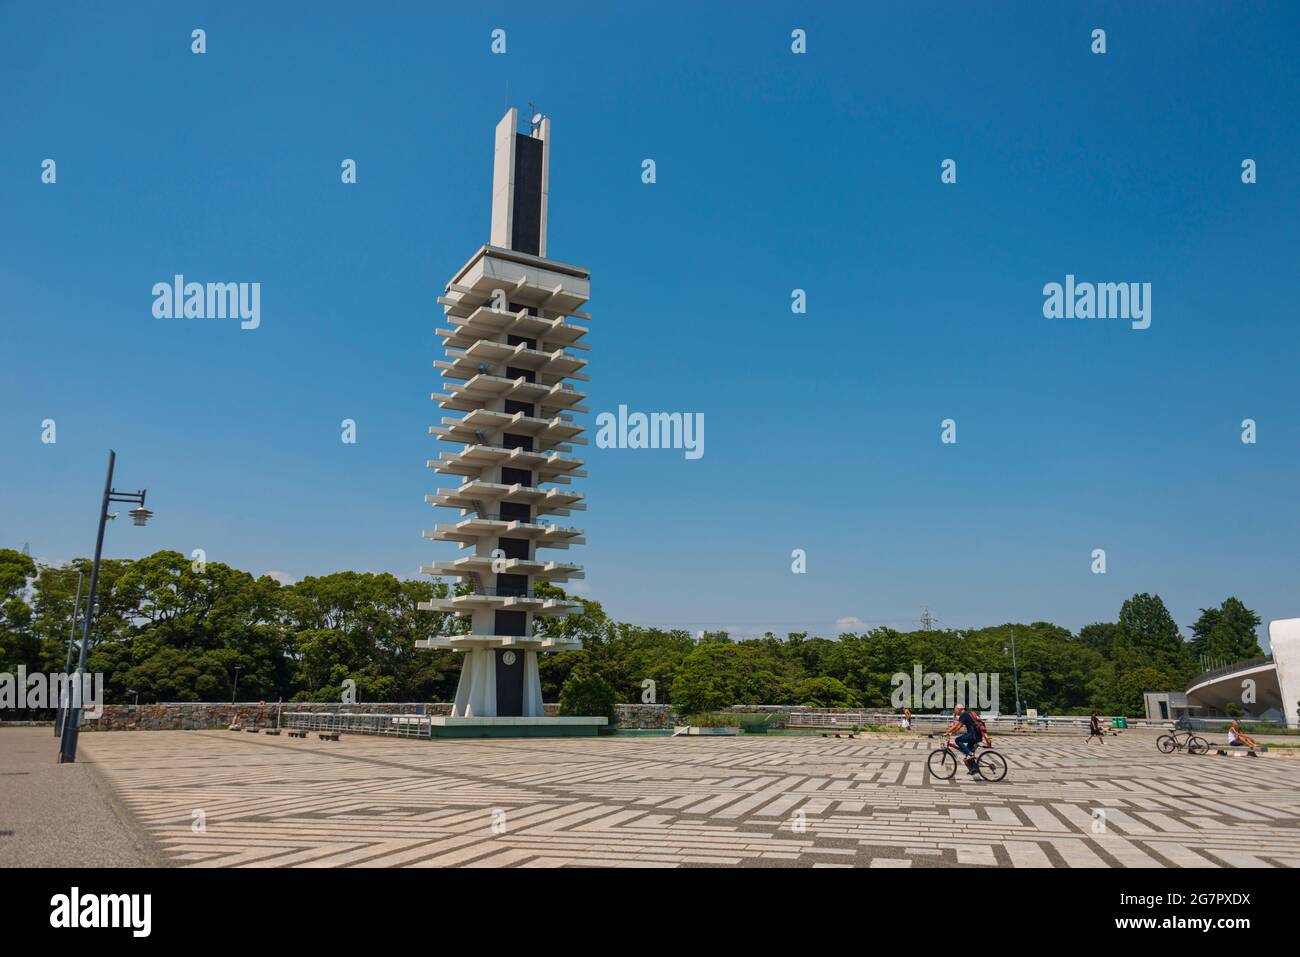 Photo shows the memorial tower inside Komazawa Olympic Park, Tokyo on 10 June 2021. During the 1964 Olympics the tower's primary function was a control tower in this the second largest venue during the Games. Robert Gilhooly photo Stock Photo